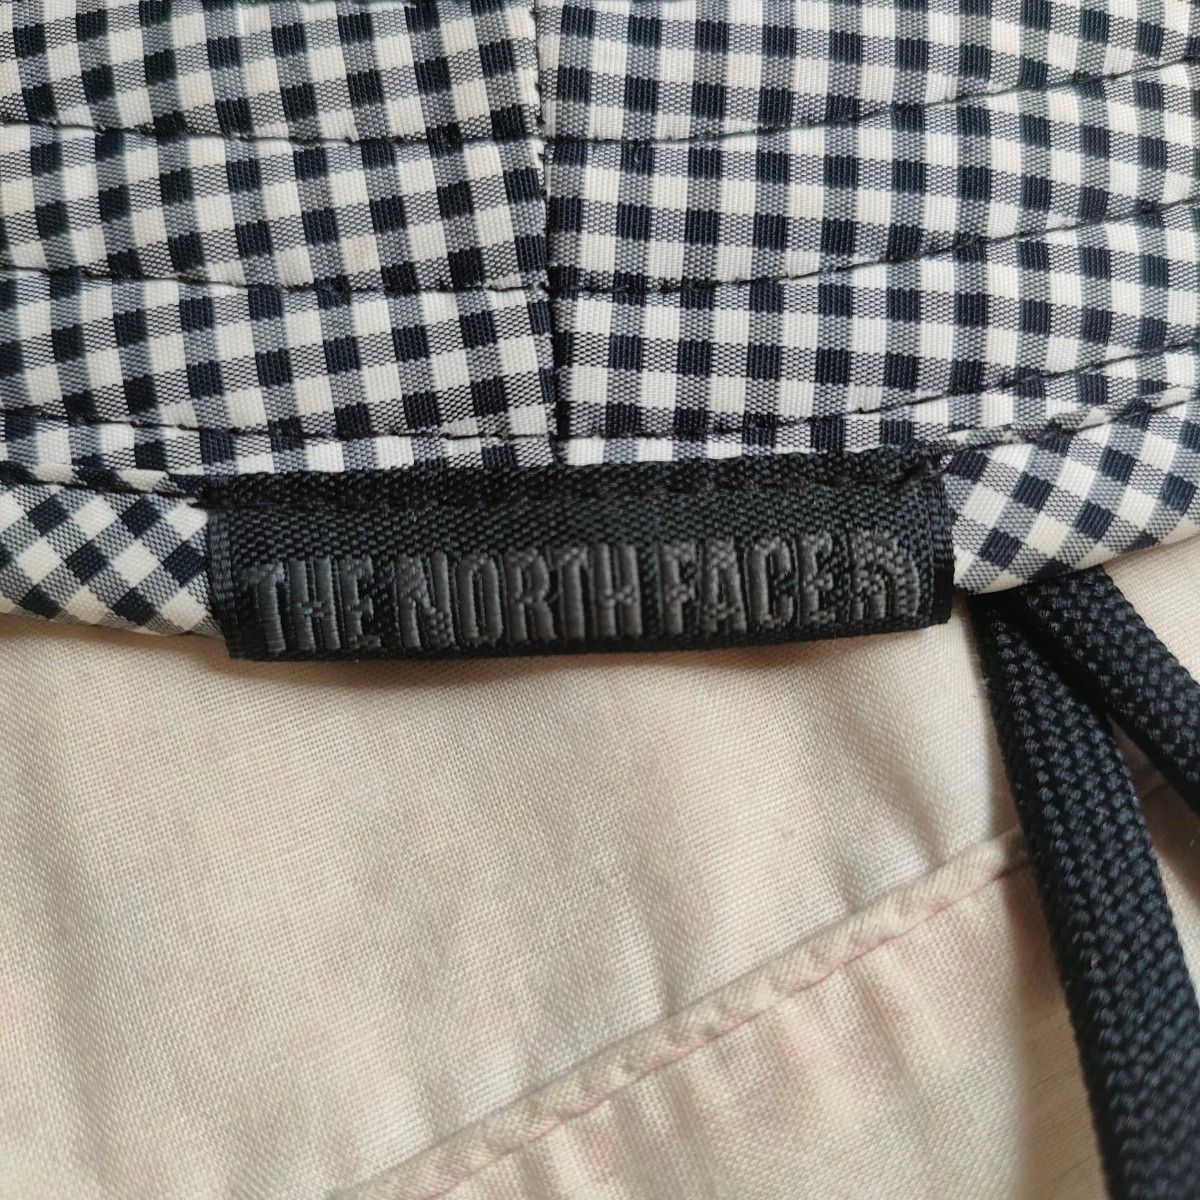 THE NORTH FACE　ハット　GORE-TEX　ホームクリーニング・撥水加工済　